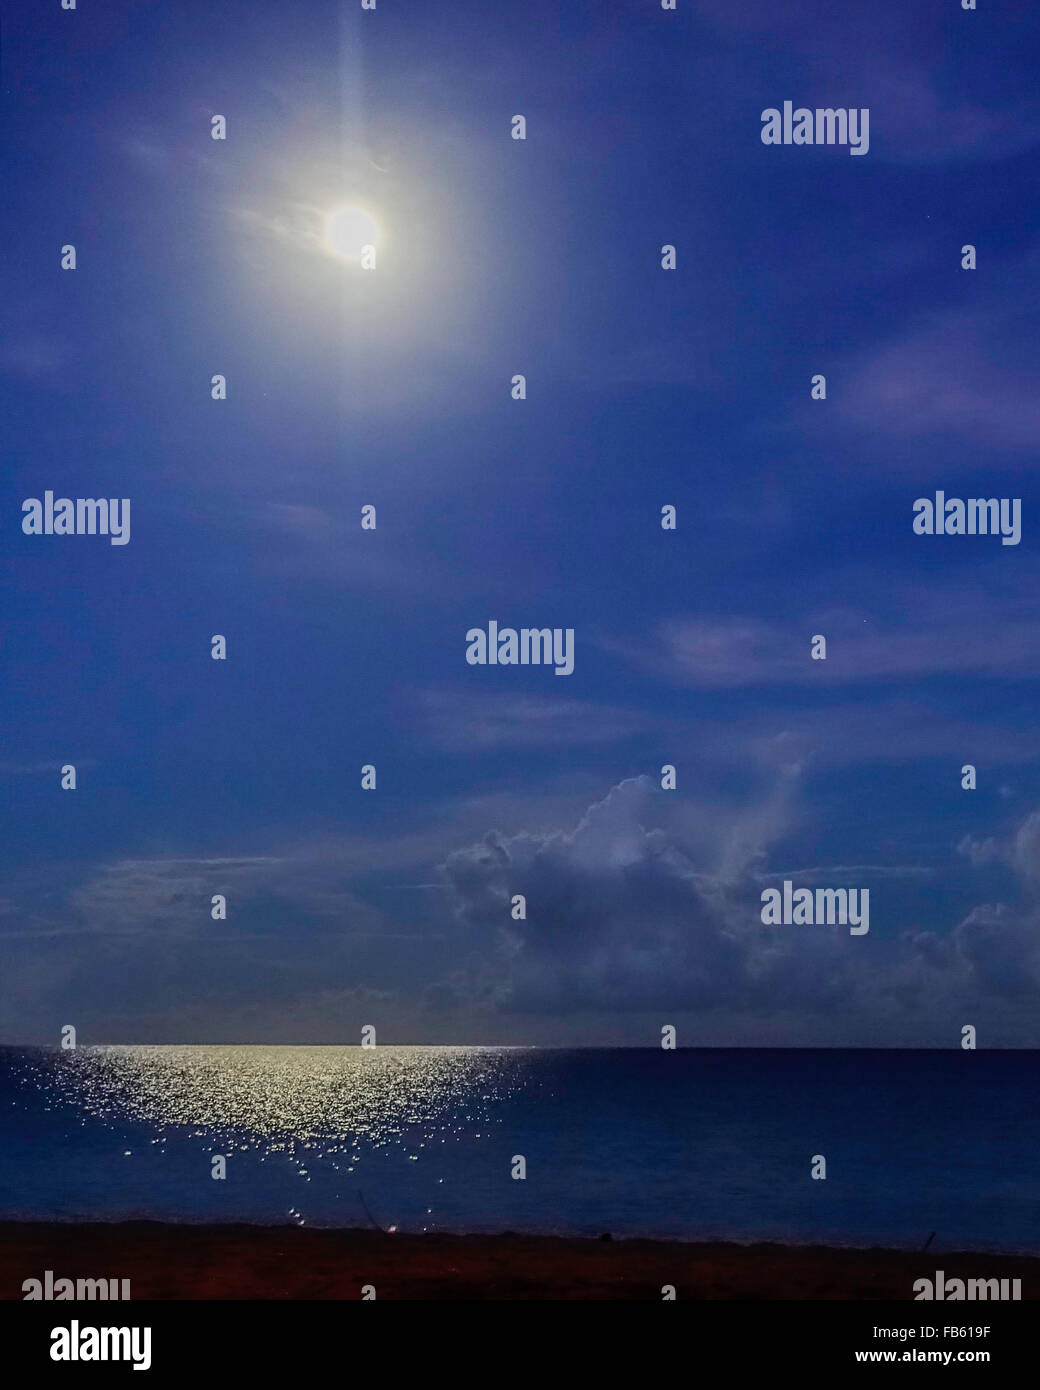 A full moon at night shines over the Caribbean casting a glow on the sea off St. Croix, U.S. Virgin Islands. Stock Photo